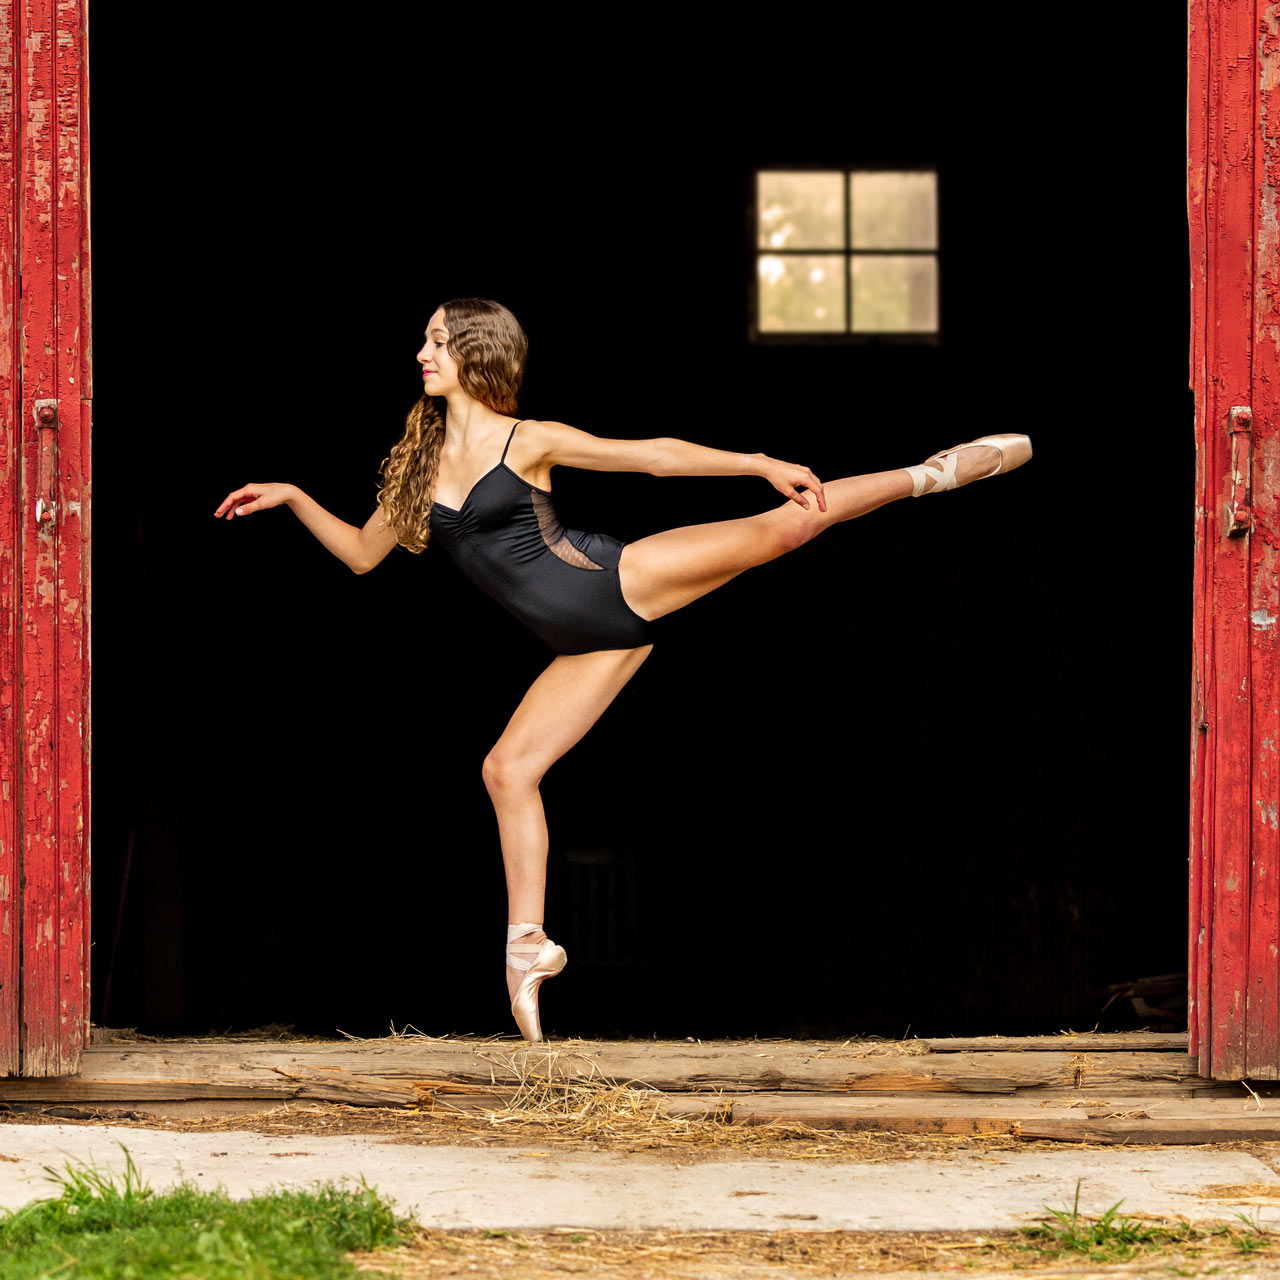 Dancer in black leotard on pointe between two red barn doors in Exulting Images’ dance photoshoot outdoors